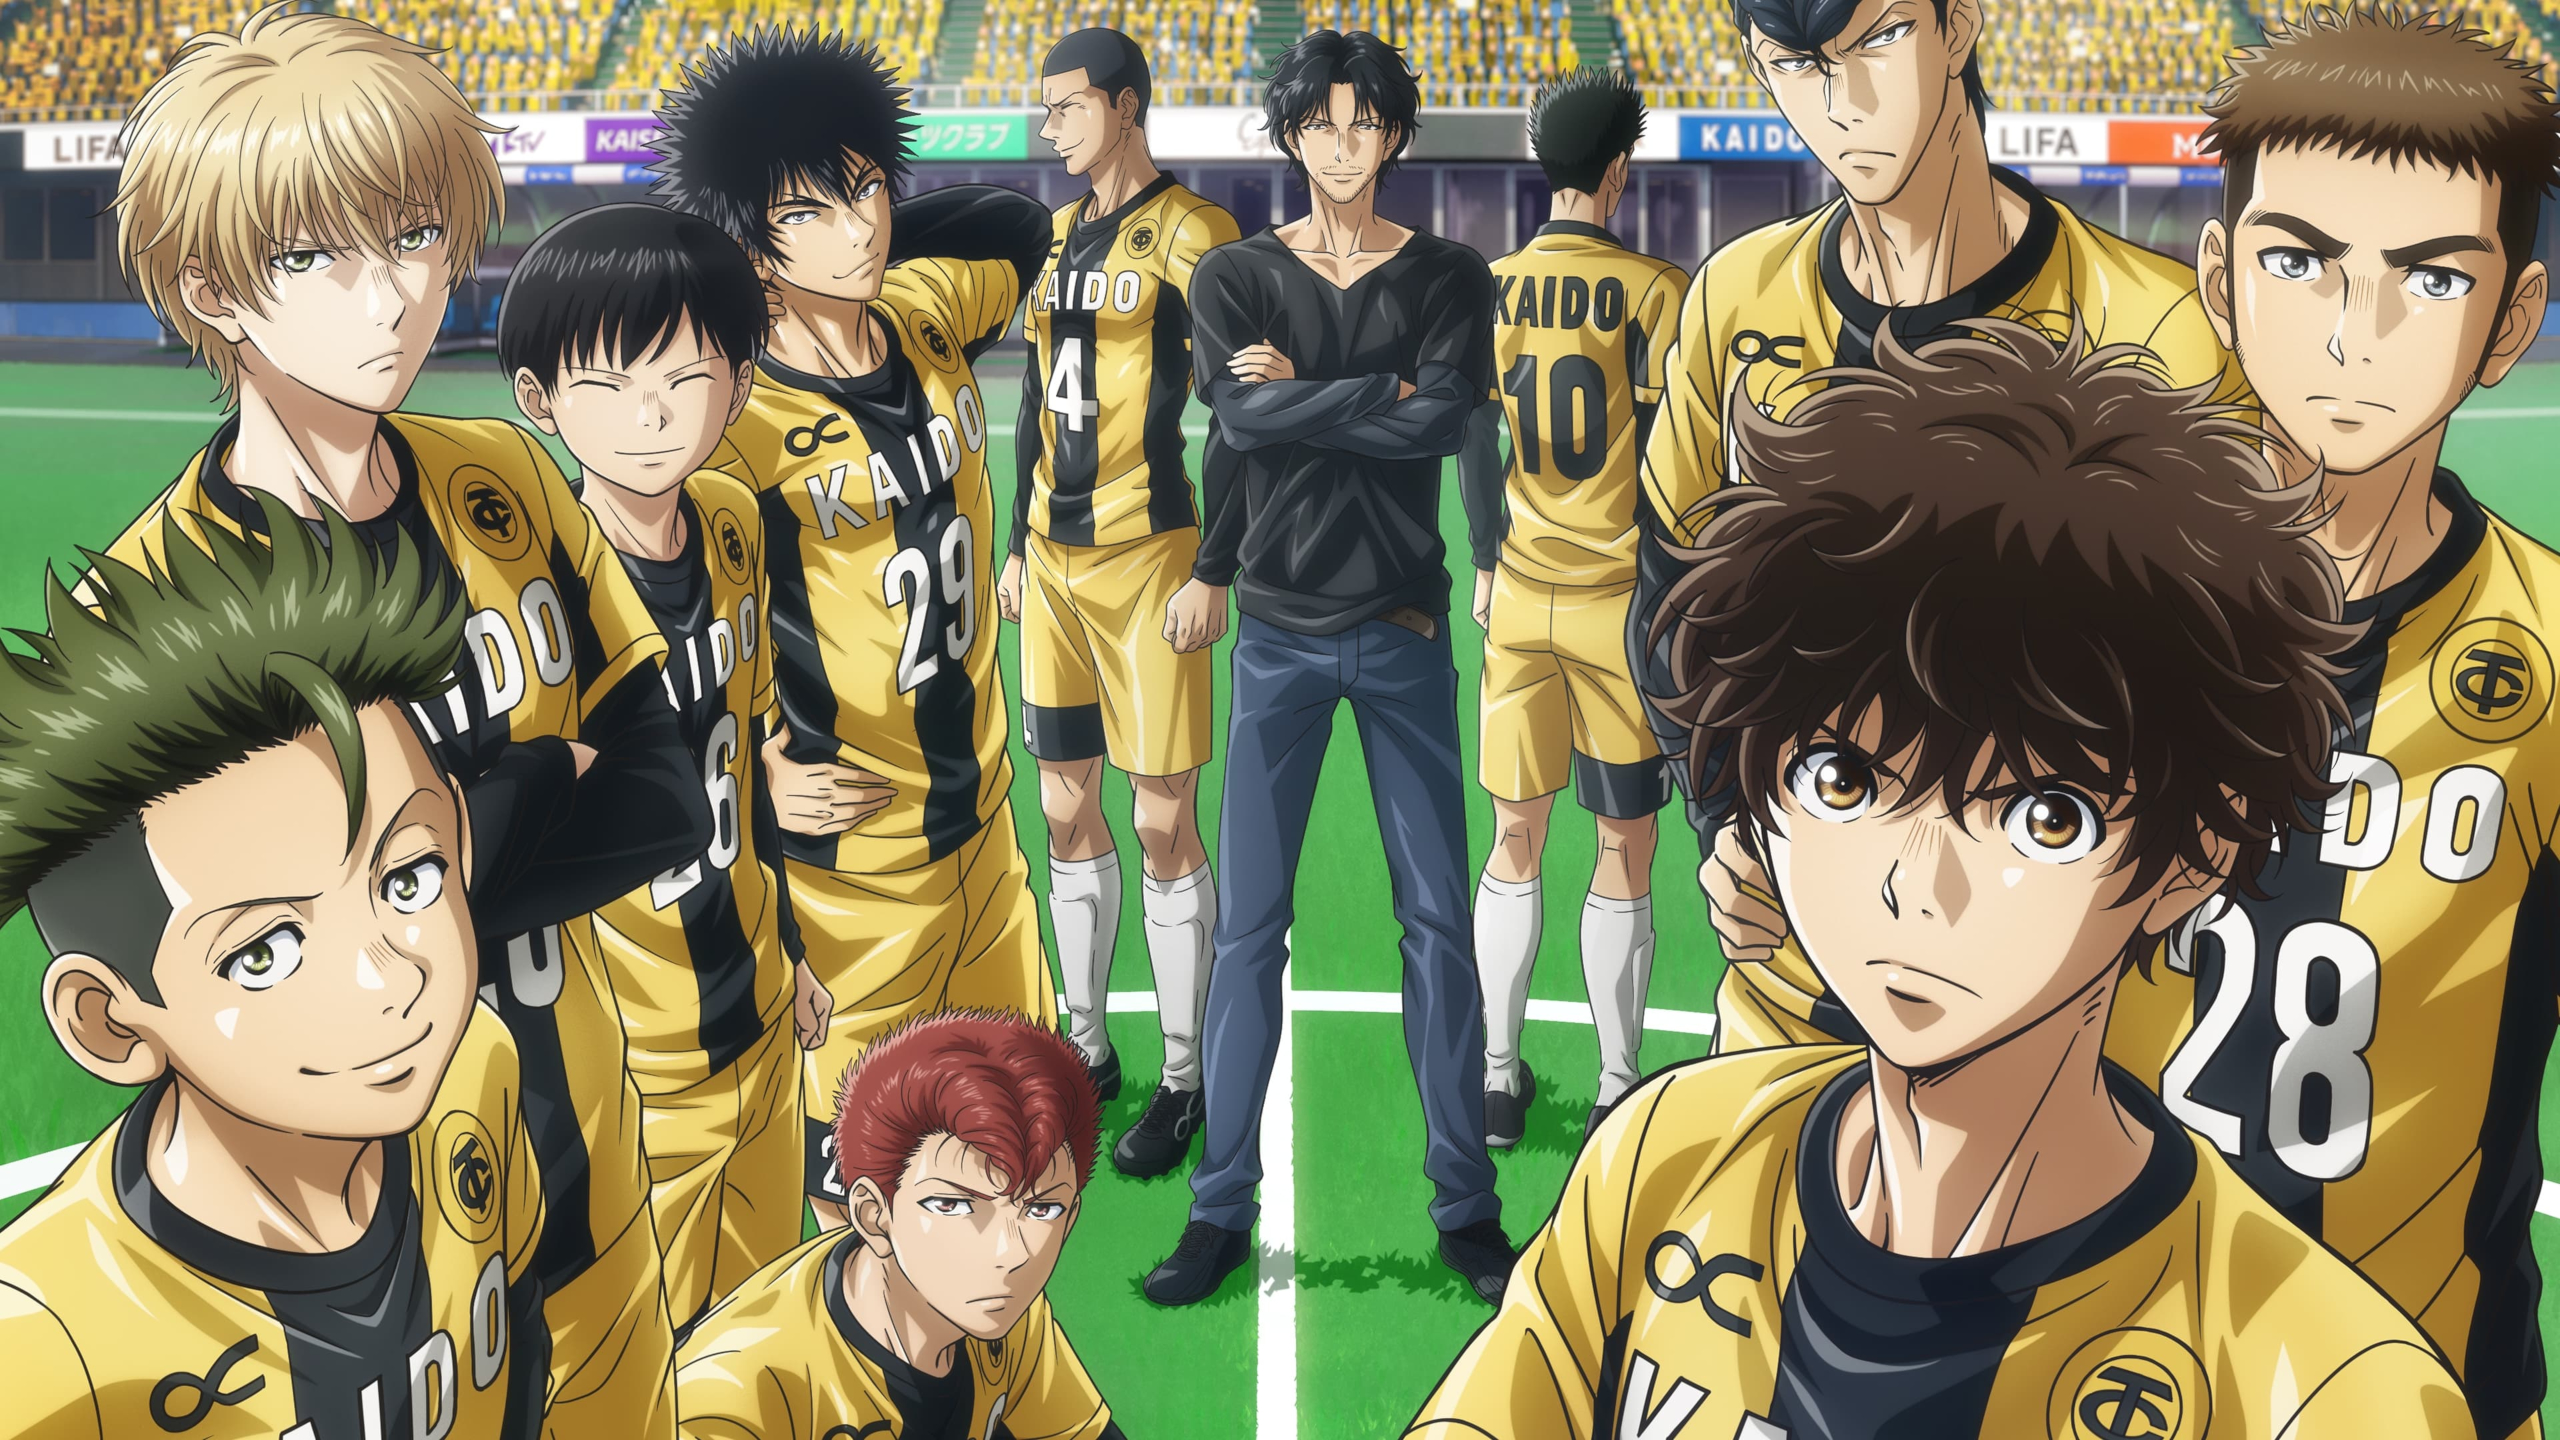 Ao Ashi Might Be One of the Great Sports Anime: Review